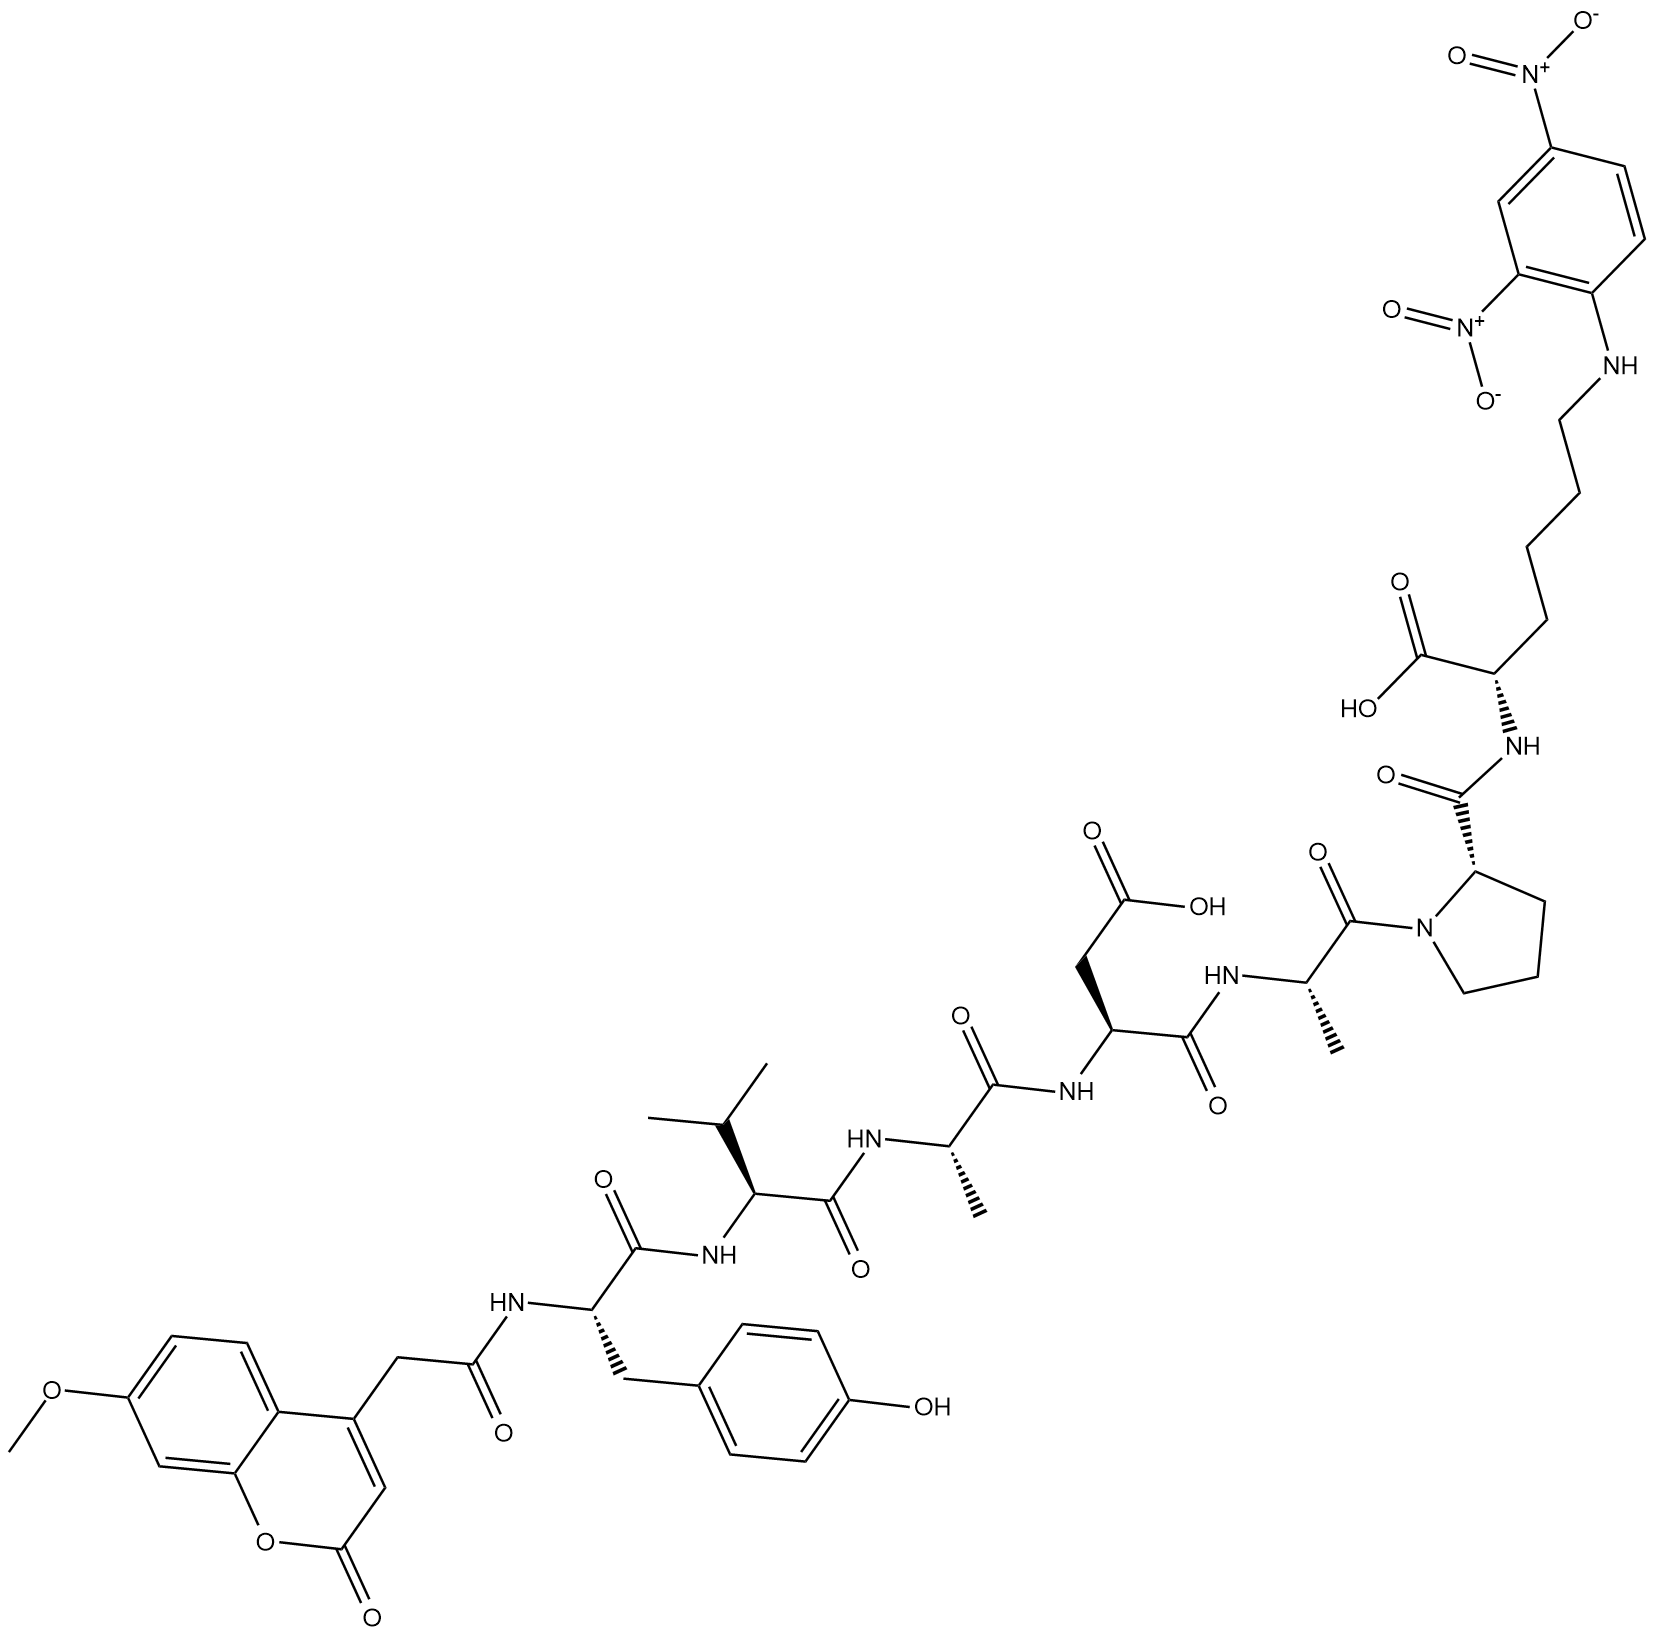 Mca-YVADAP-Lys(Dnp)-OH Chemical Structure